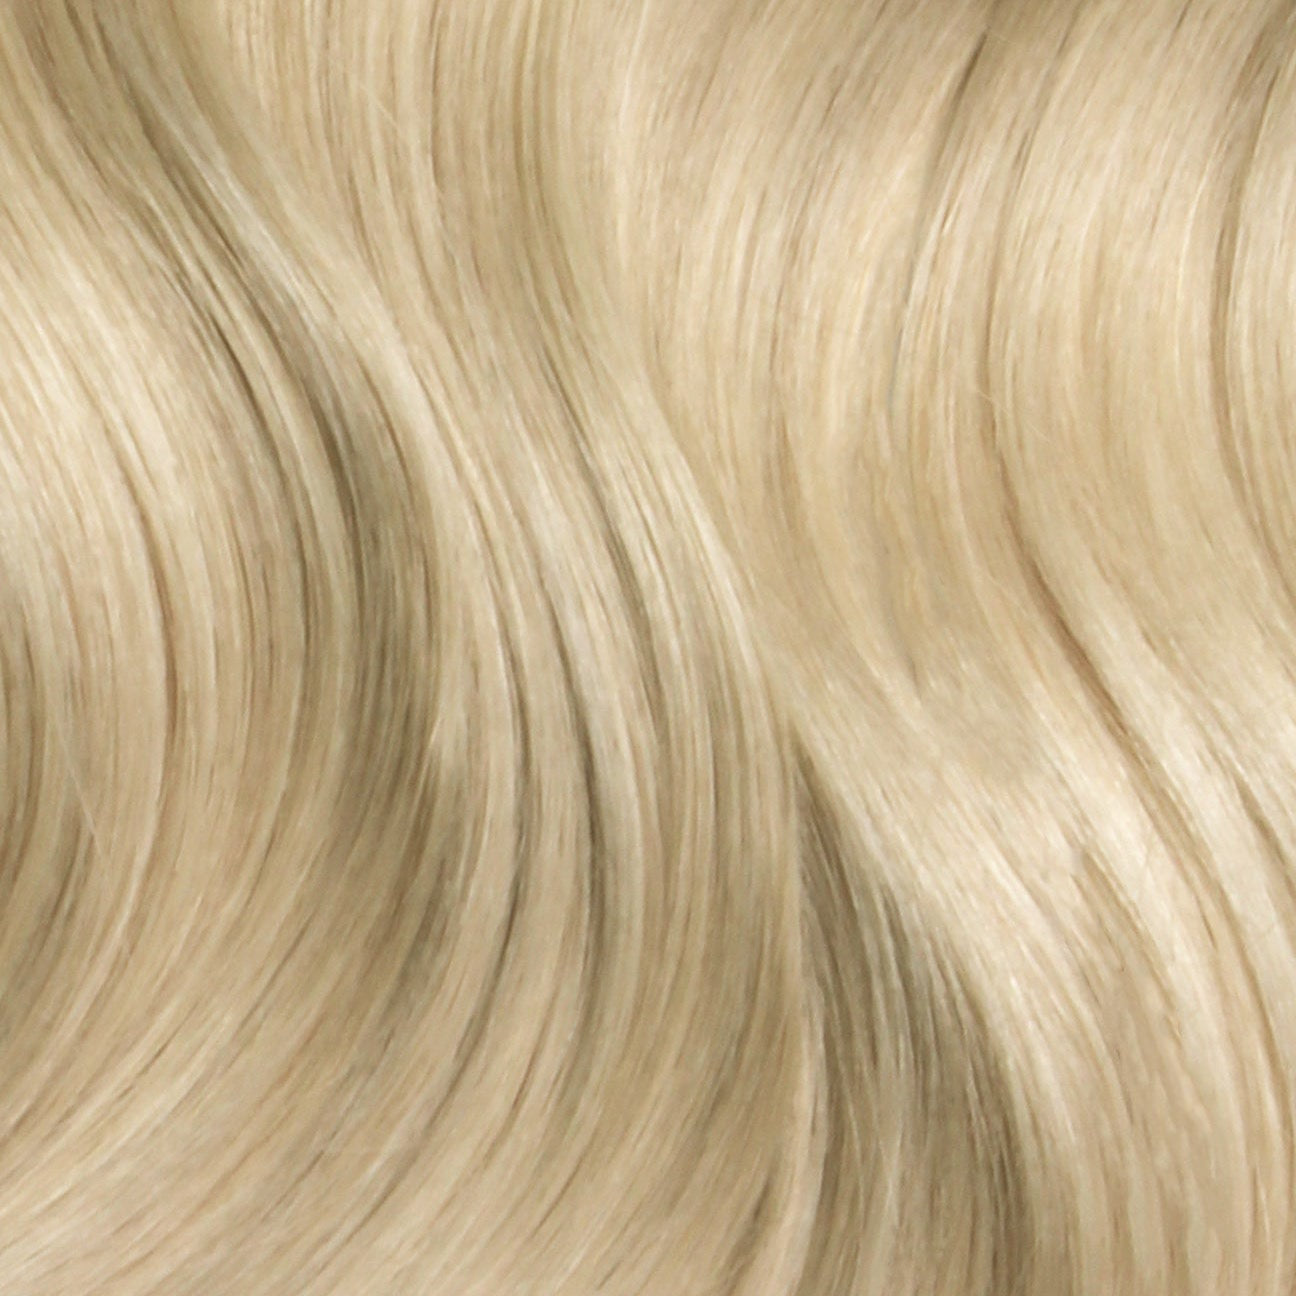 Nano Bonds 20 Inches - SWAY Hair Extensions Hollywood-Ash-Blonde-18A-613A Ultra-fine, invisible bonds for a flawless, natural look. 100% Remy Human hair, lightweight and versatile. Reusable and perfect for individual or salon use.